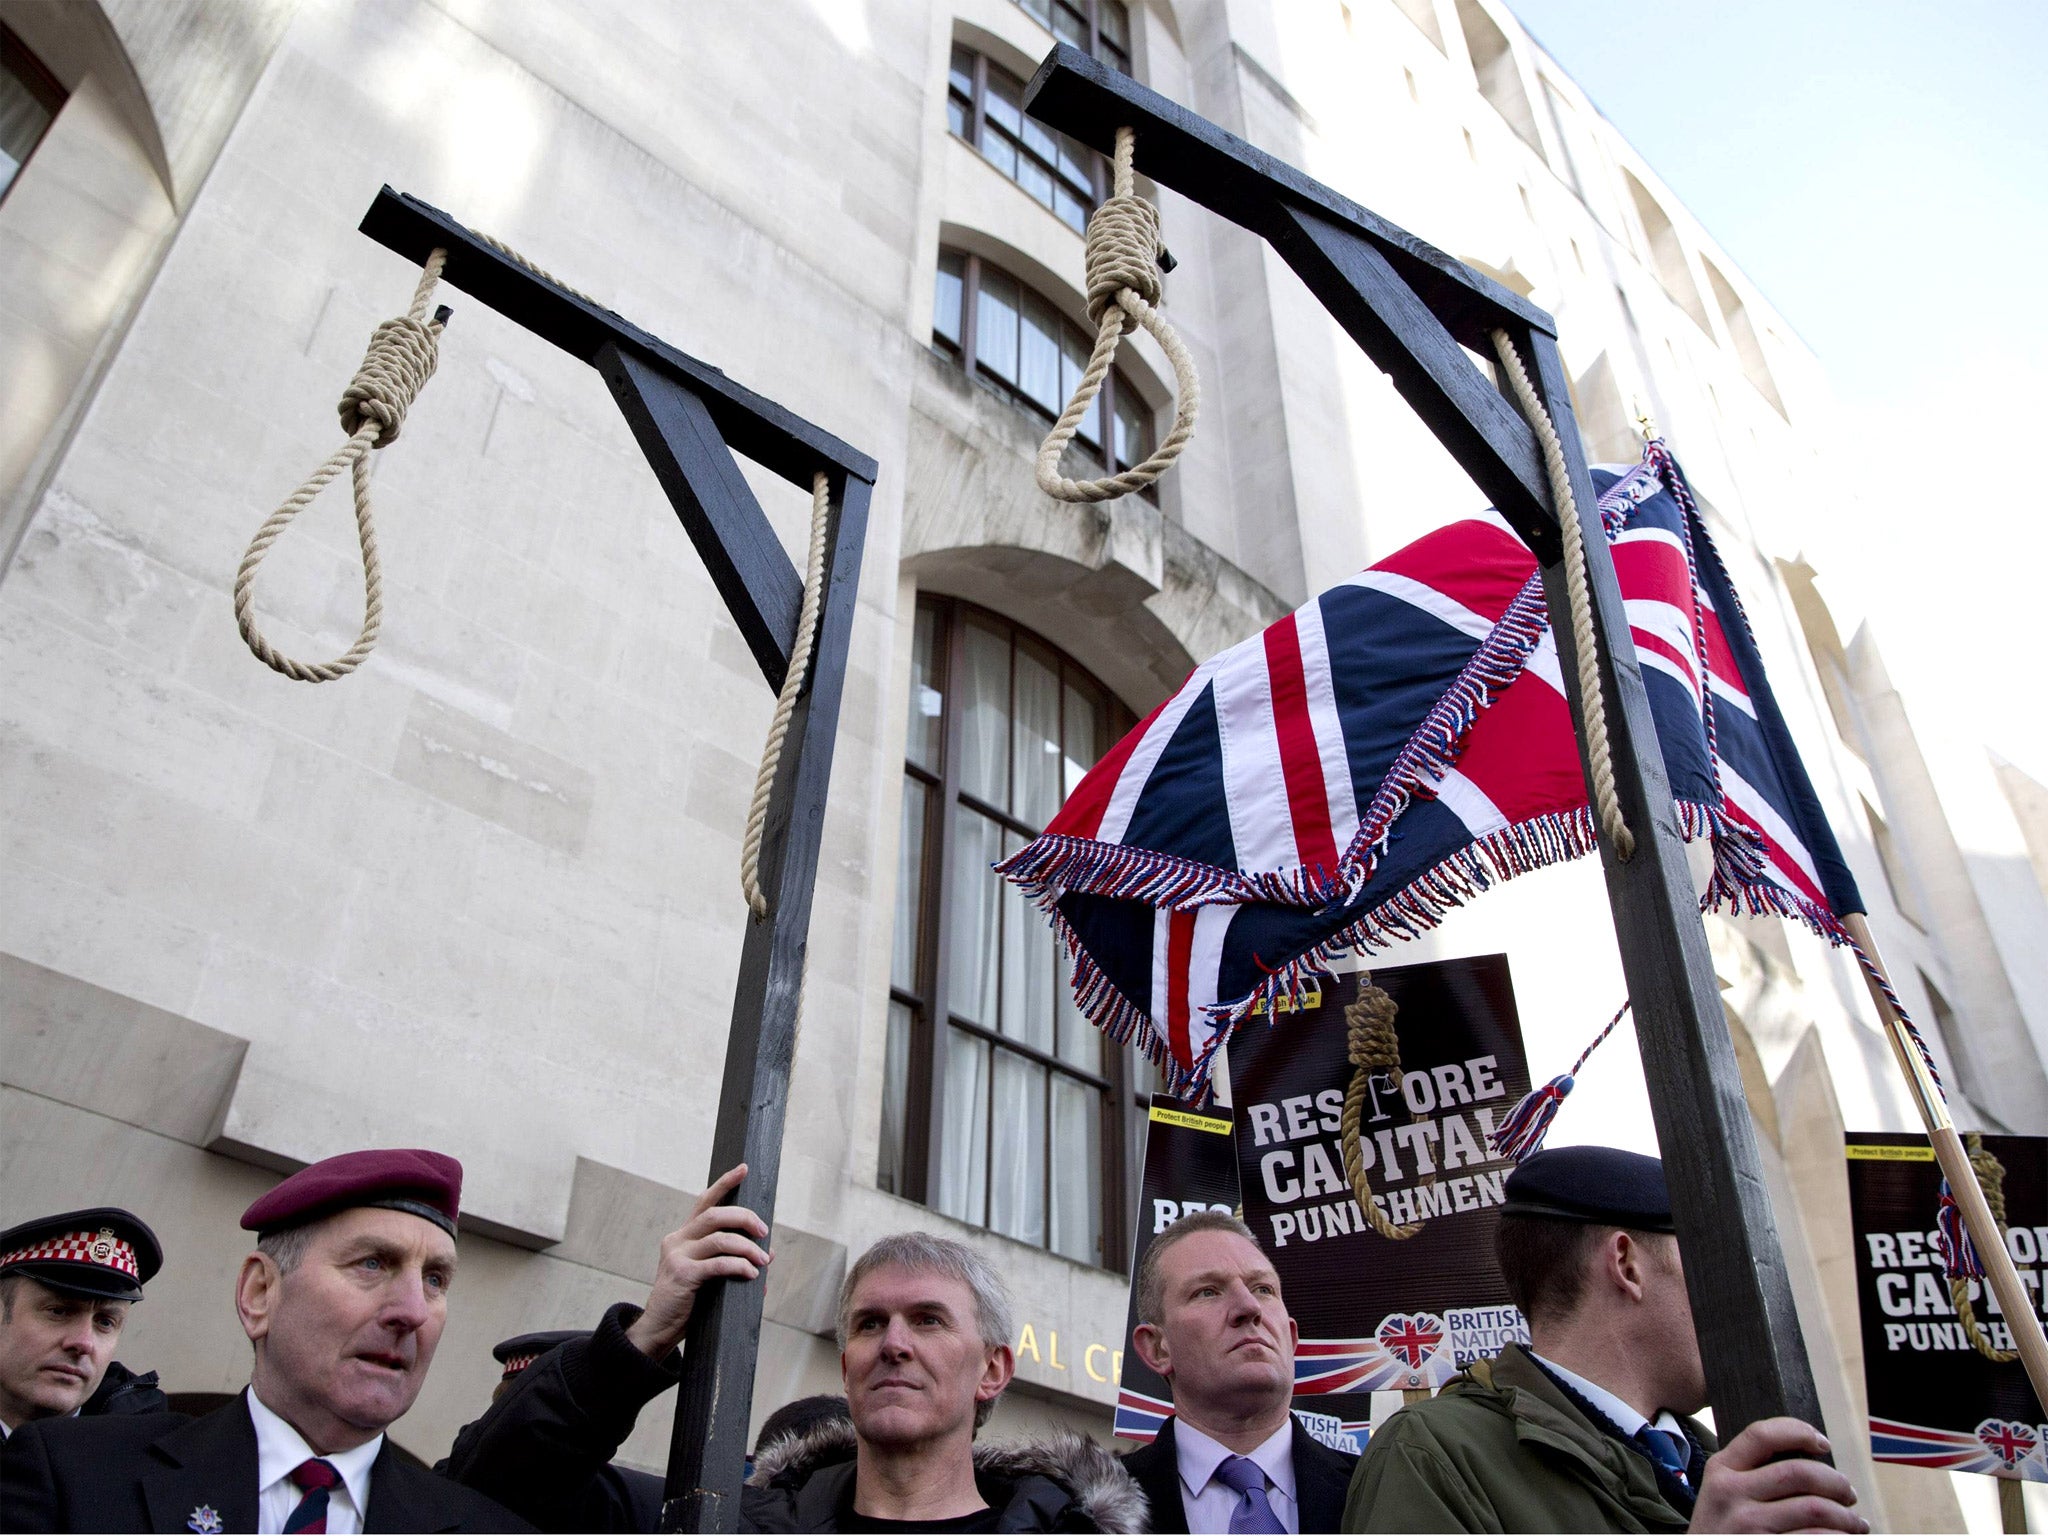 Far-right extremists, who brought a gallows to court, scuffled with police